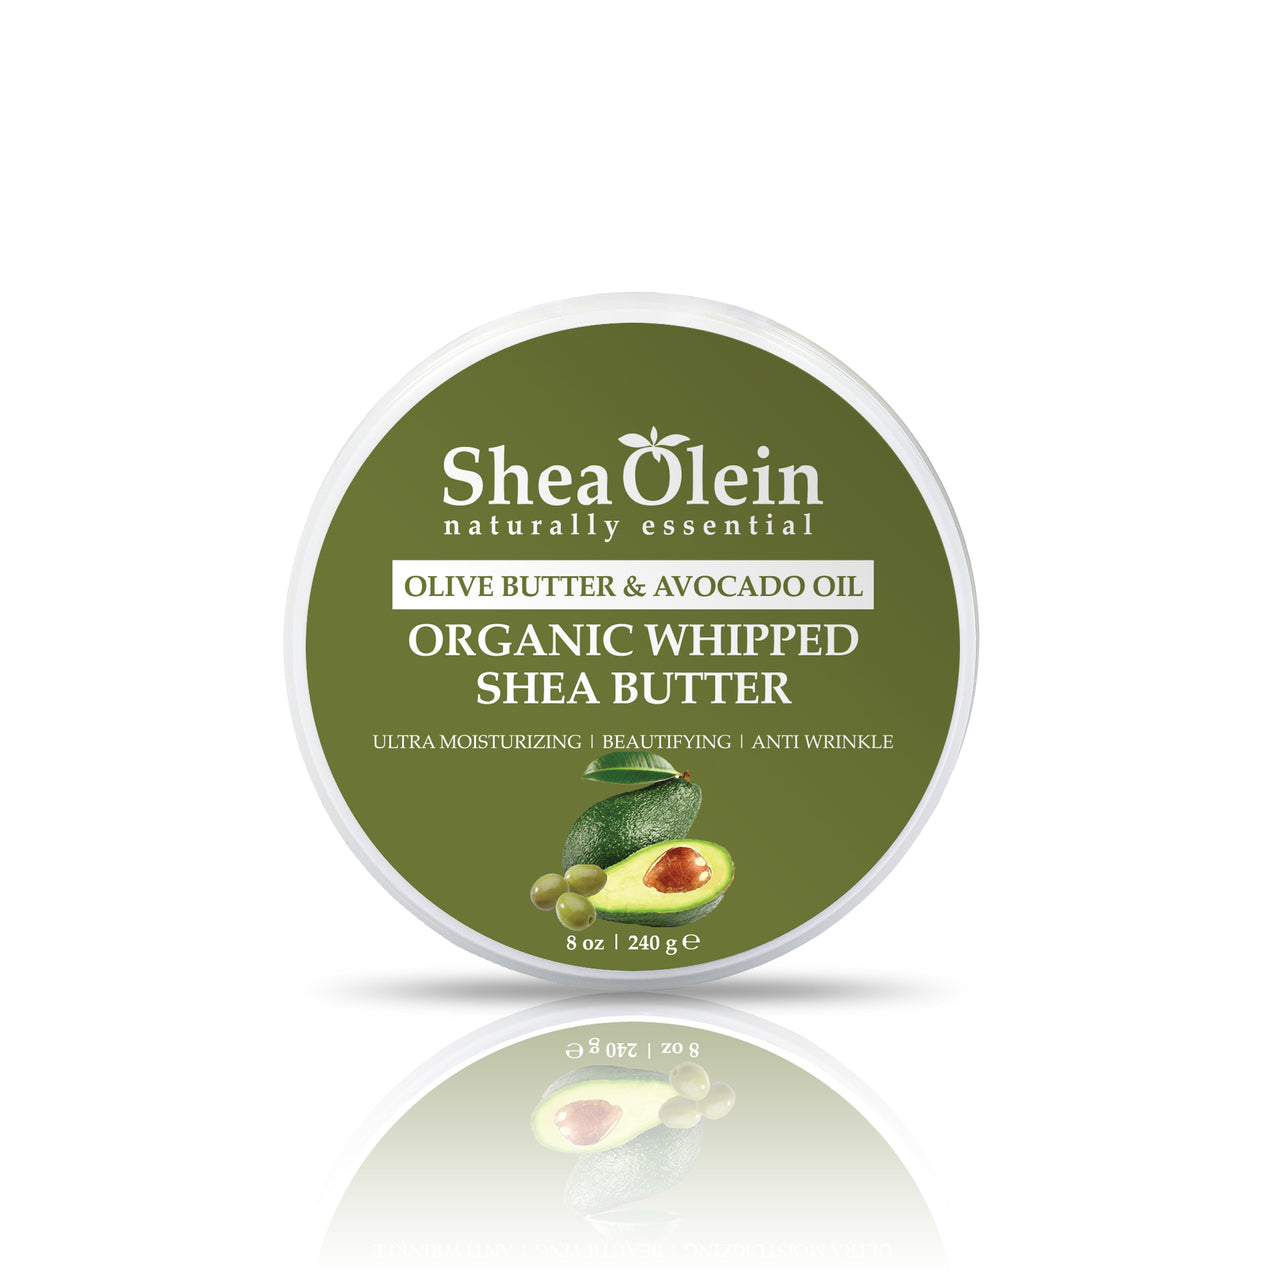 Olive Butter & Avocado Oil Organic Whipped Shea Butter 8oz